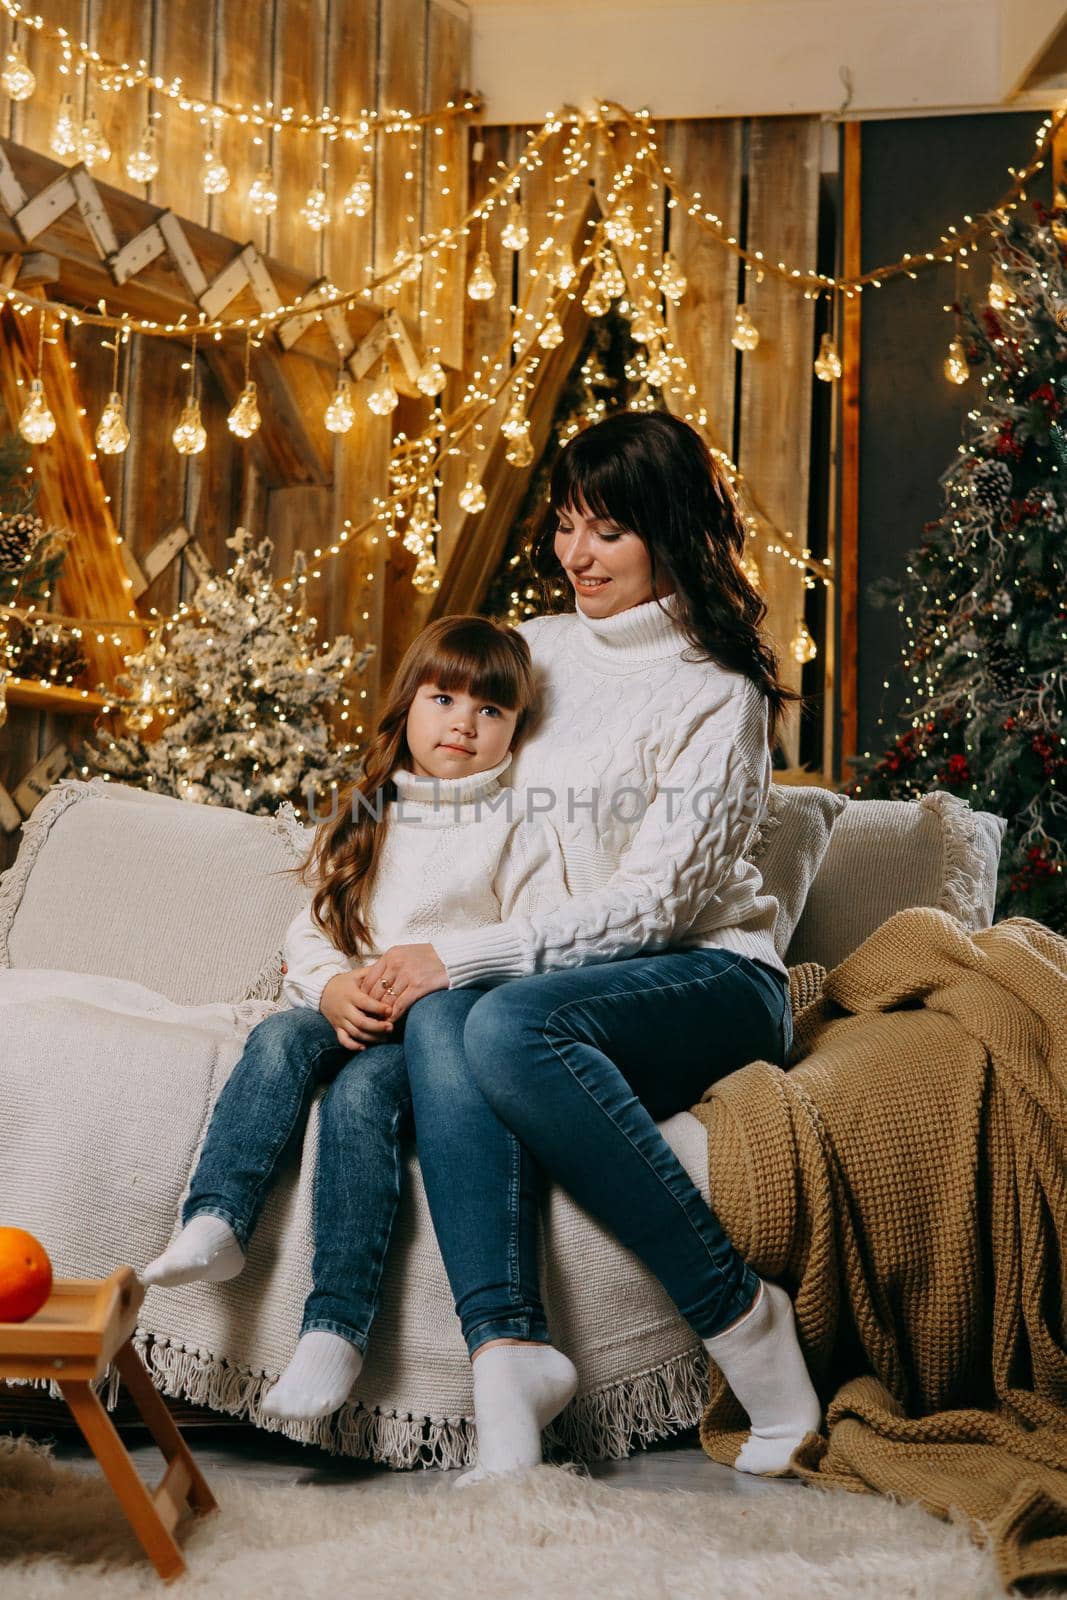 A little girl with her mother in a cozy home environment on the sofa next to the Christmas tree. The theme of New Year holidays and festive interior with garlands and light bulbs.